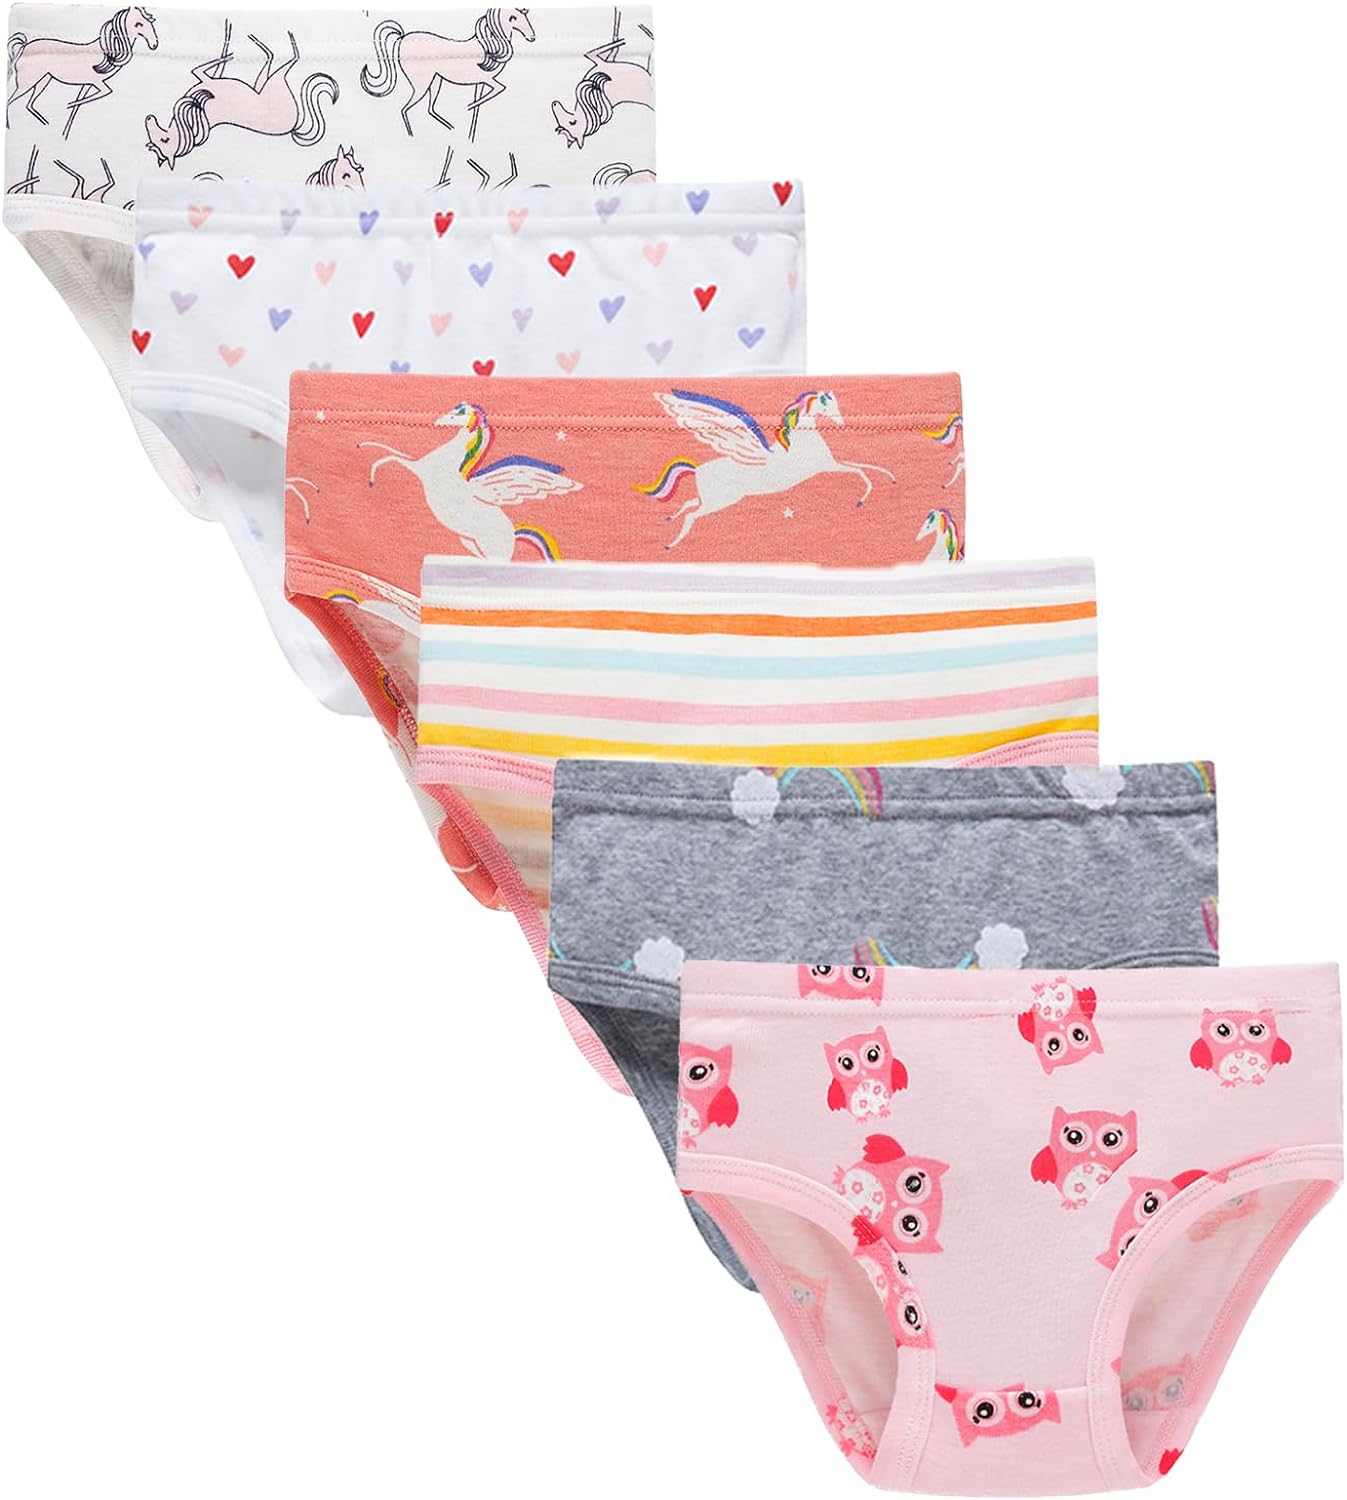 Boboking Baby Soft Cotton Panties Little Girls'briefs Toddler Style 2 Size  B9 for sale online